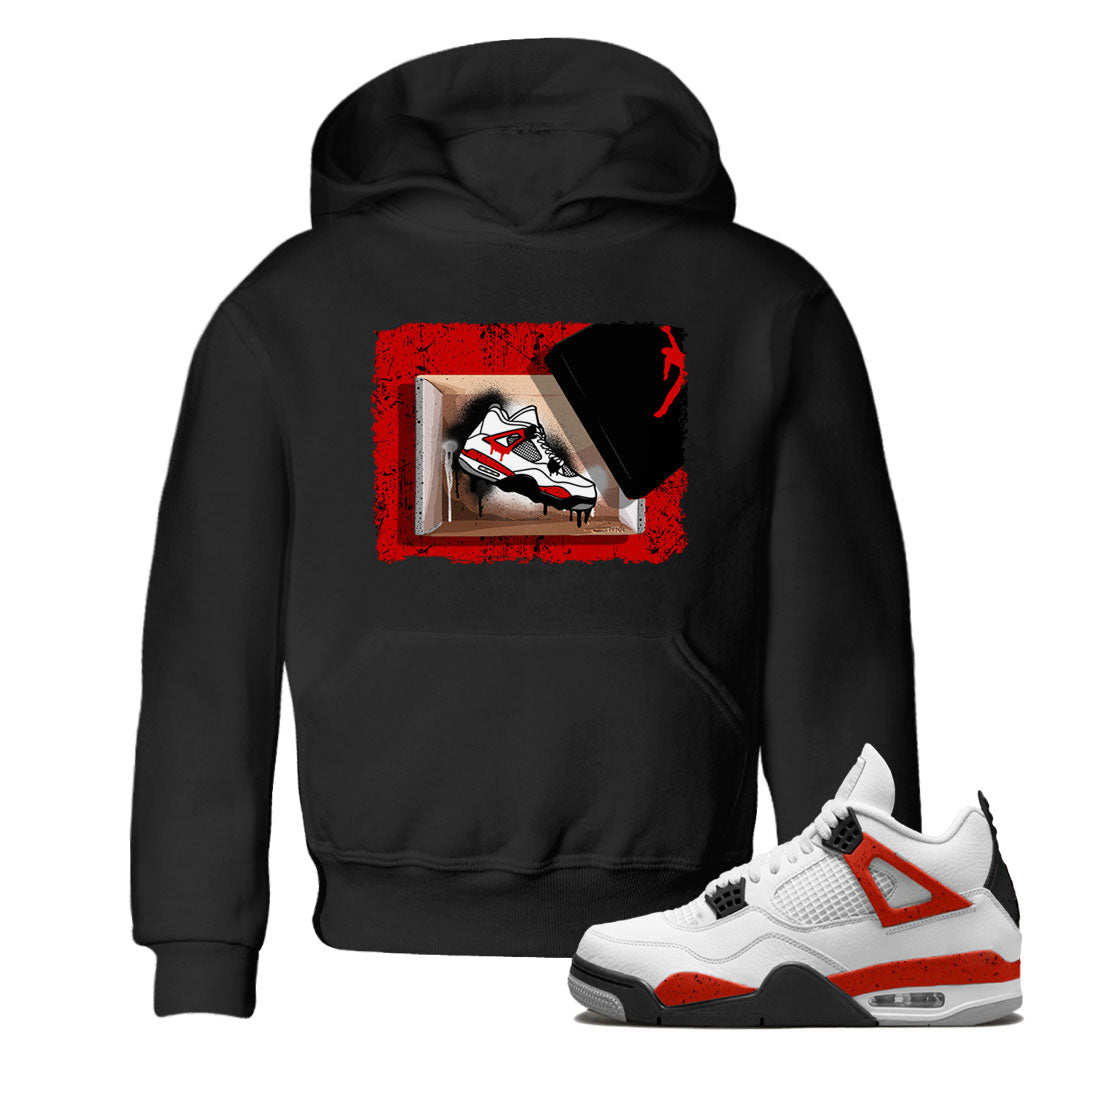 Jordan 4 Red Cement Varsity Jacket, Shirt for Sneakerhead, Shoes Drip, Jacket to Match Retro 4S Red Cement